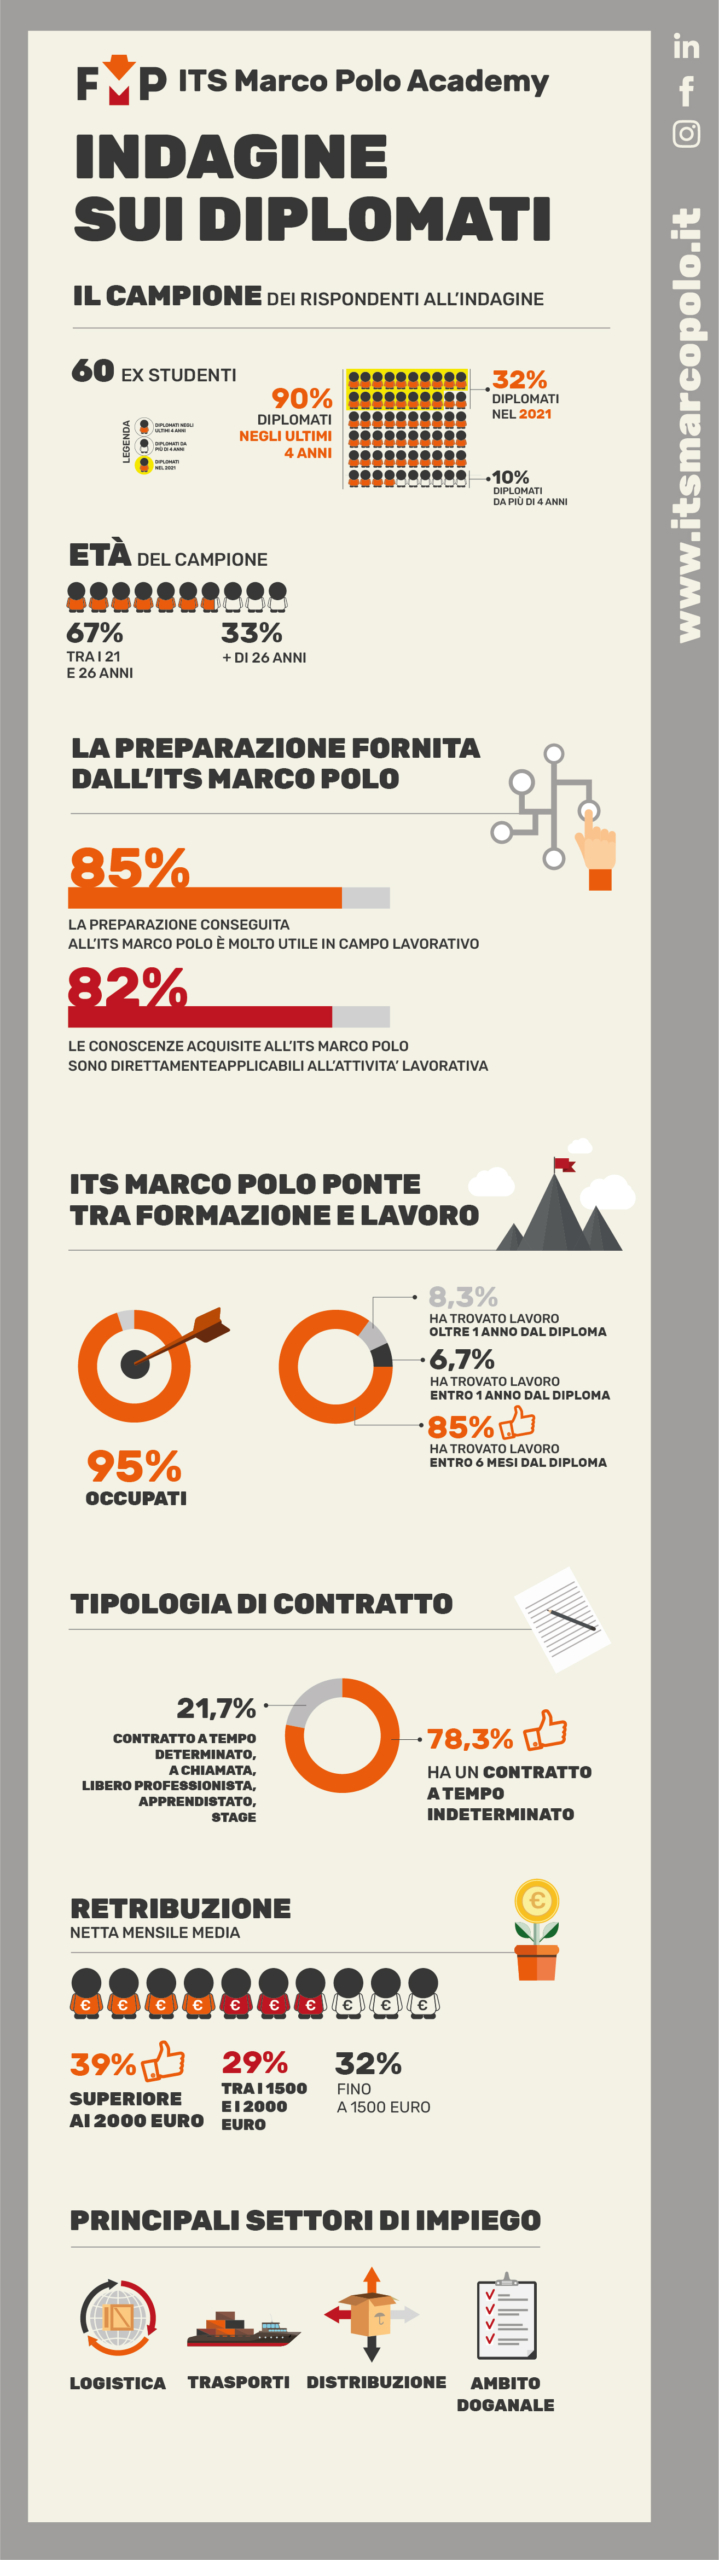 Infografica: indagine sui diplomati ITS Marco Polo Academy